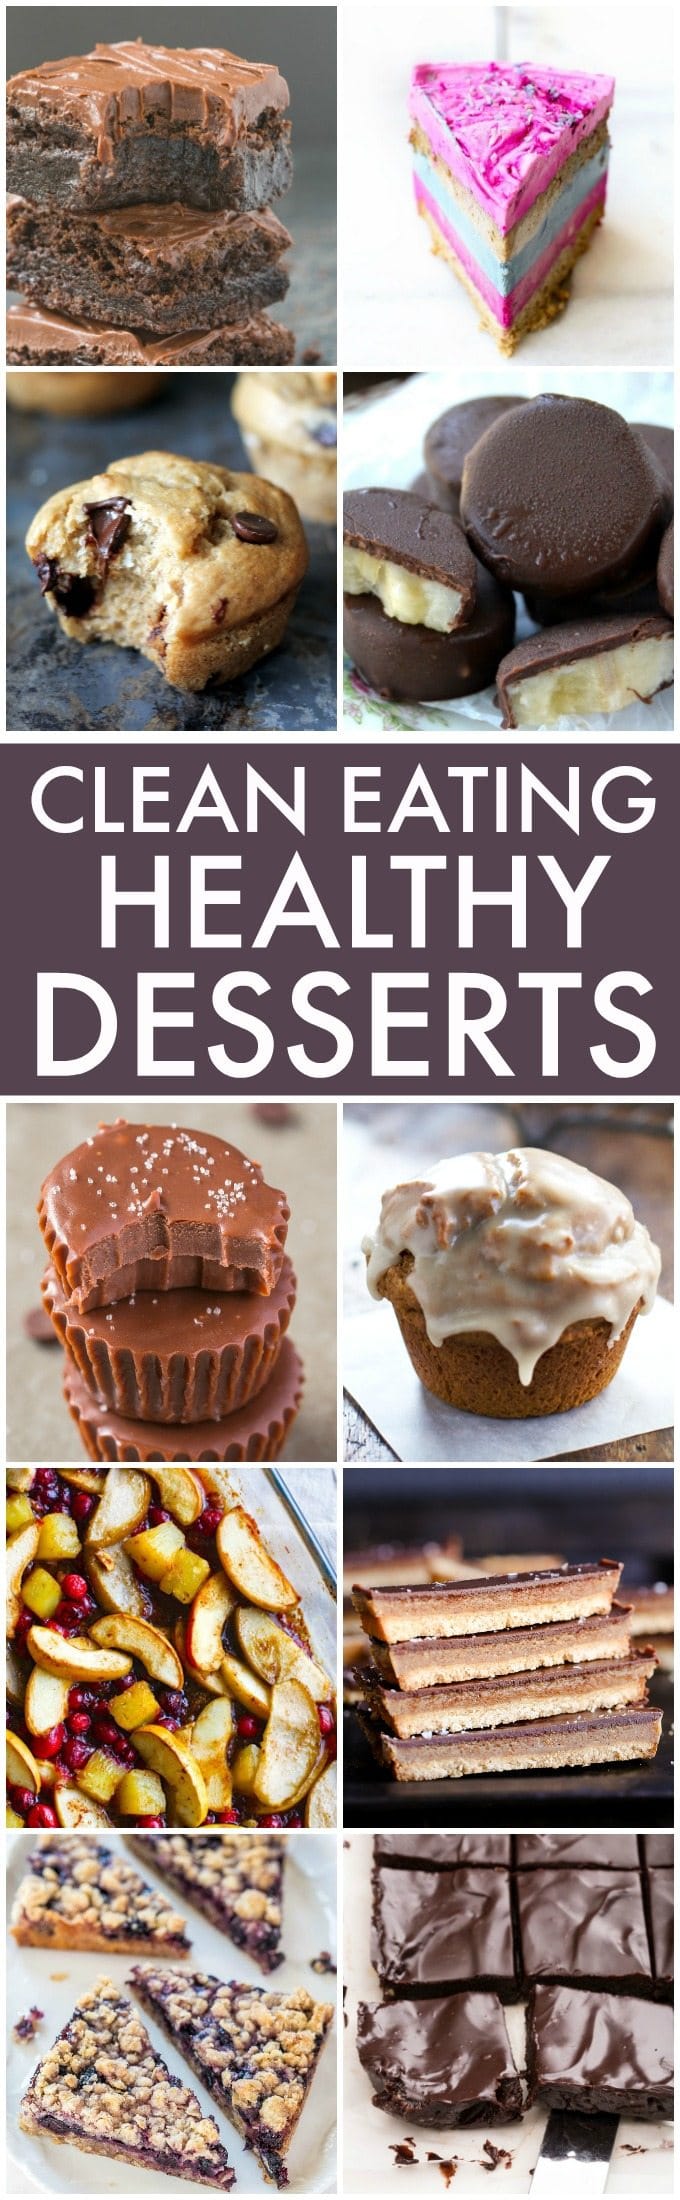 Clean Eating Holiday Desserts (V, GF, Paleo options)- The BEST Clean Eating and Healthy Holiday Desserts, snacks and sweets perfect for Christmas, the festive season, gifts or anytime- Flourless, muffins, bars, brownies, and sugar free options! {vegan, gluten free, paleo recipe options}- thebigmansworld.com